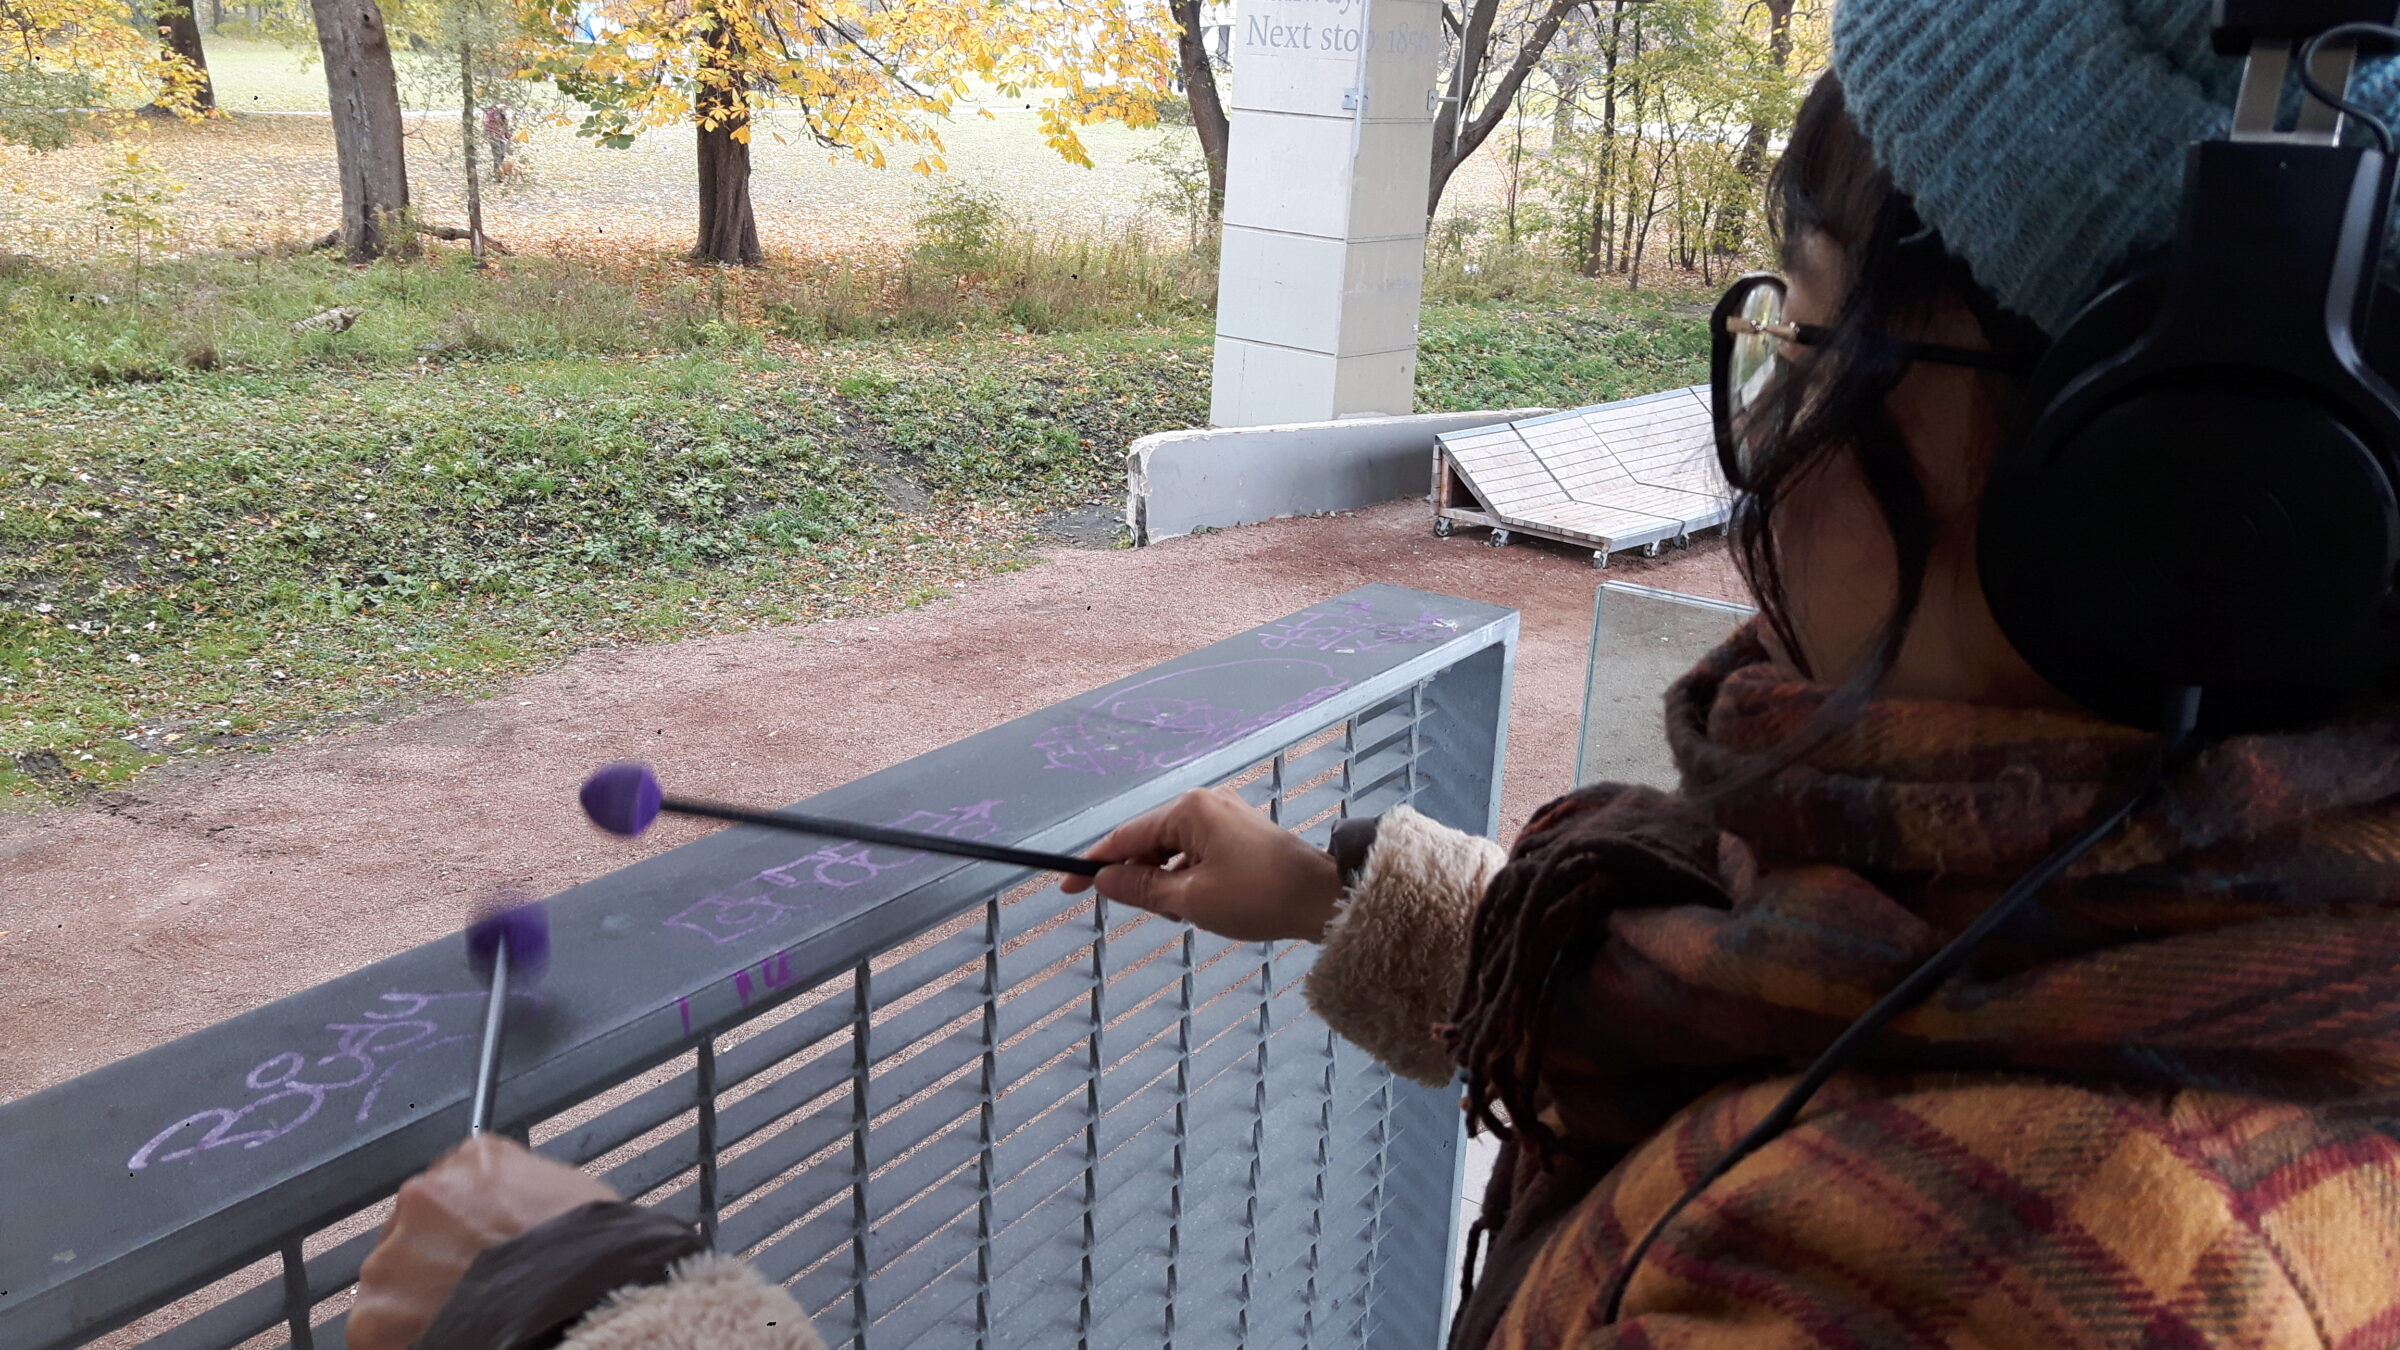 Germaine Liu has two drum sticks in hand and is banking them against the a railing at The Bentway.